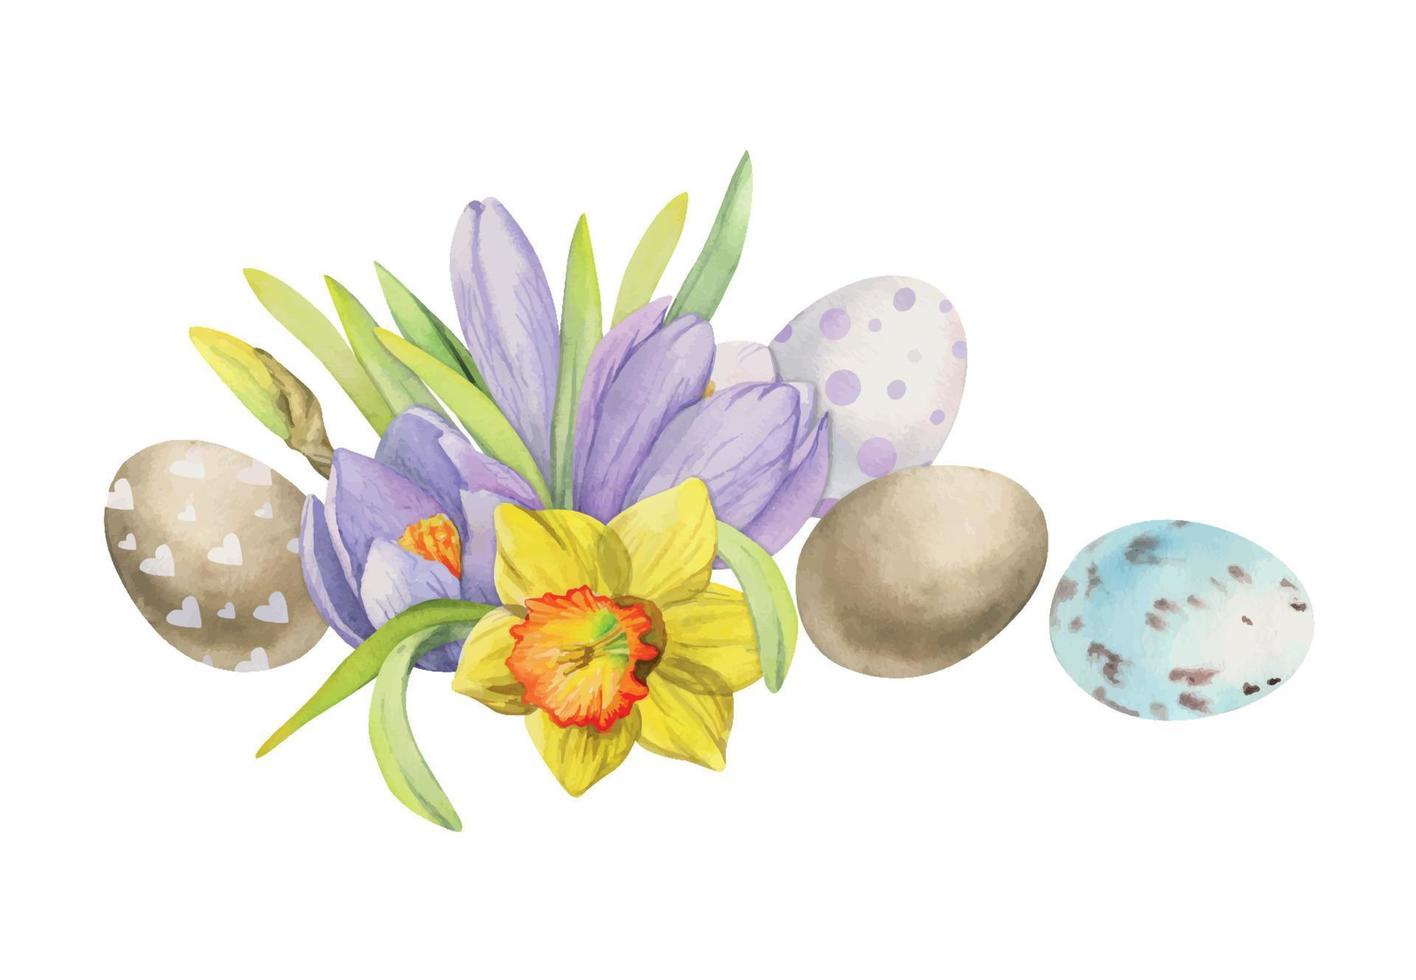 Watercolor hand drawn Easter celebration clipart. Composition of painted eggs, spring flowers, leaves, twig. Isolated on white background Design for invitations, gifts, greeting cards, print, textile vector